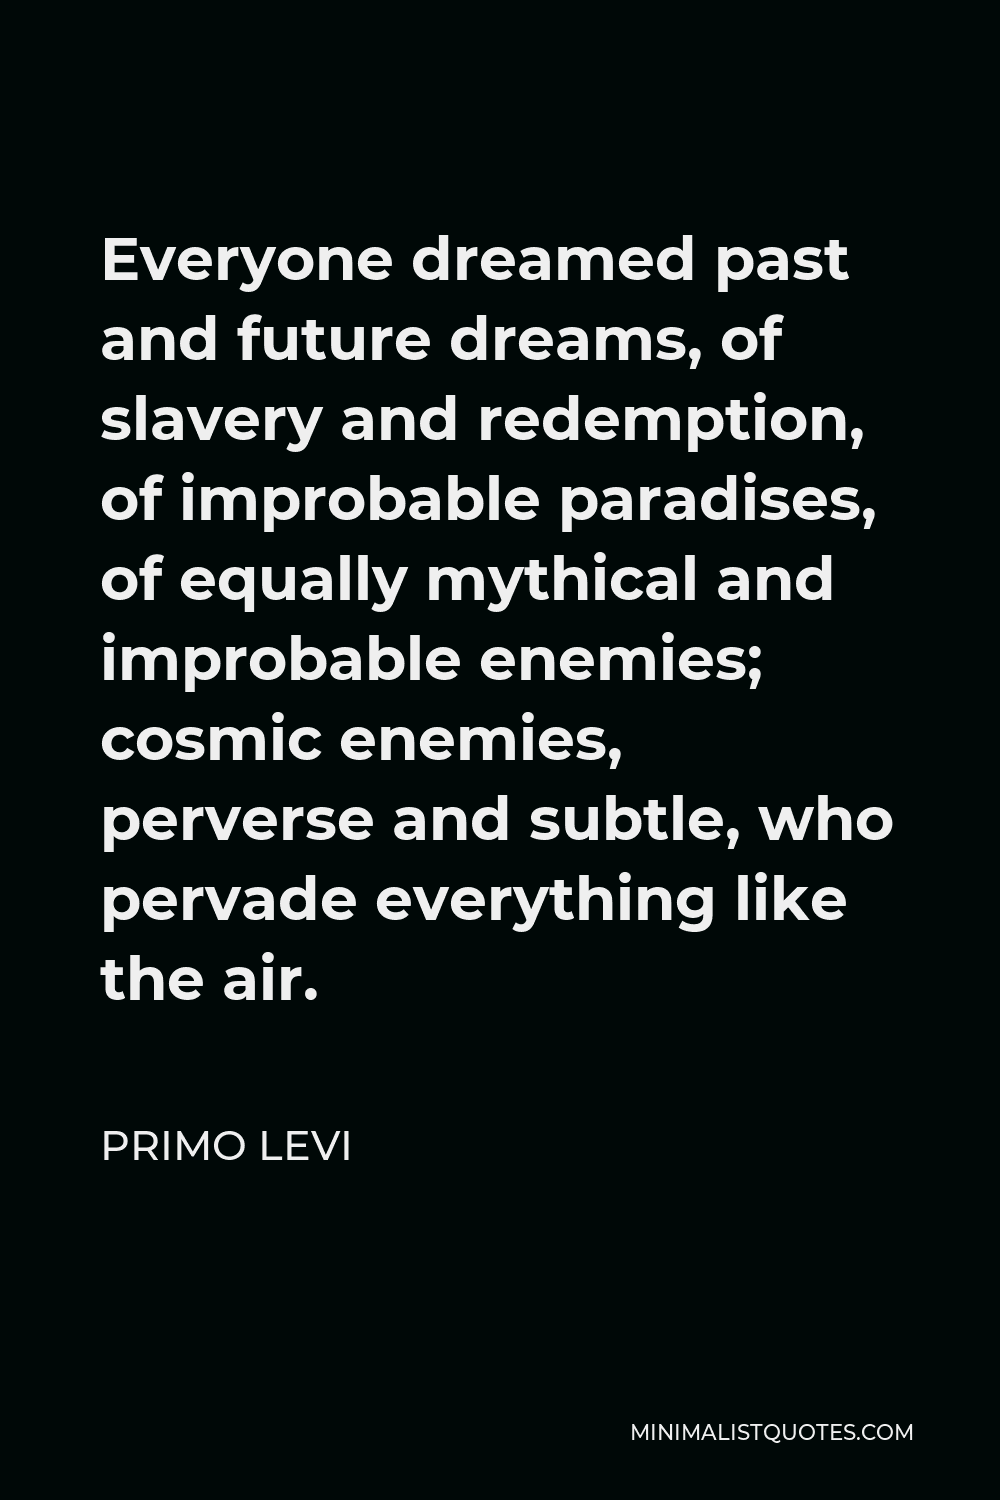 Primo Levi Quote - Everyone dreamed past and future dreams, of slavery and redemption, of improbable paradises, of equally mythical and improbable enemies; cosmic enemies, perverse and subtle, who pervade everything like the air.